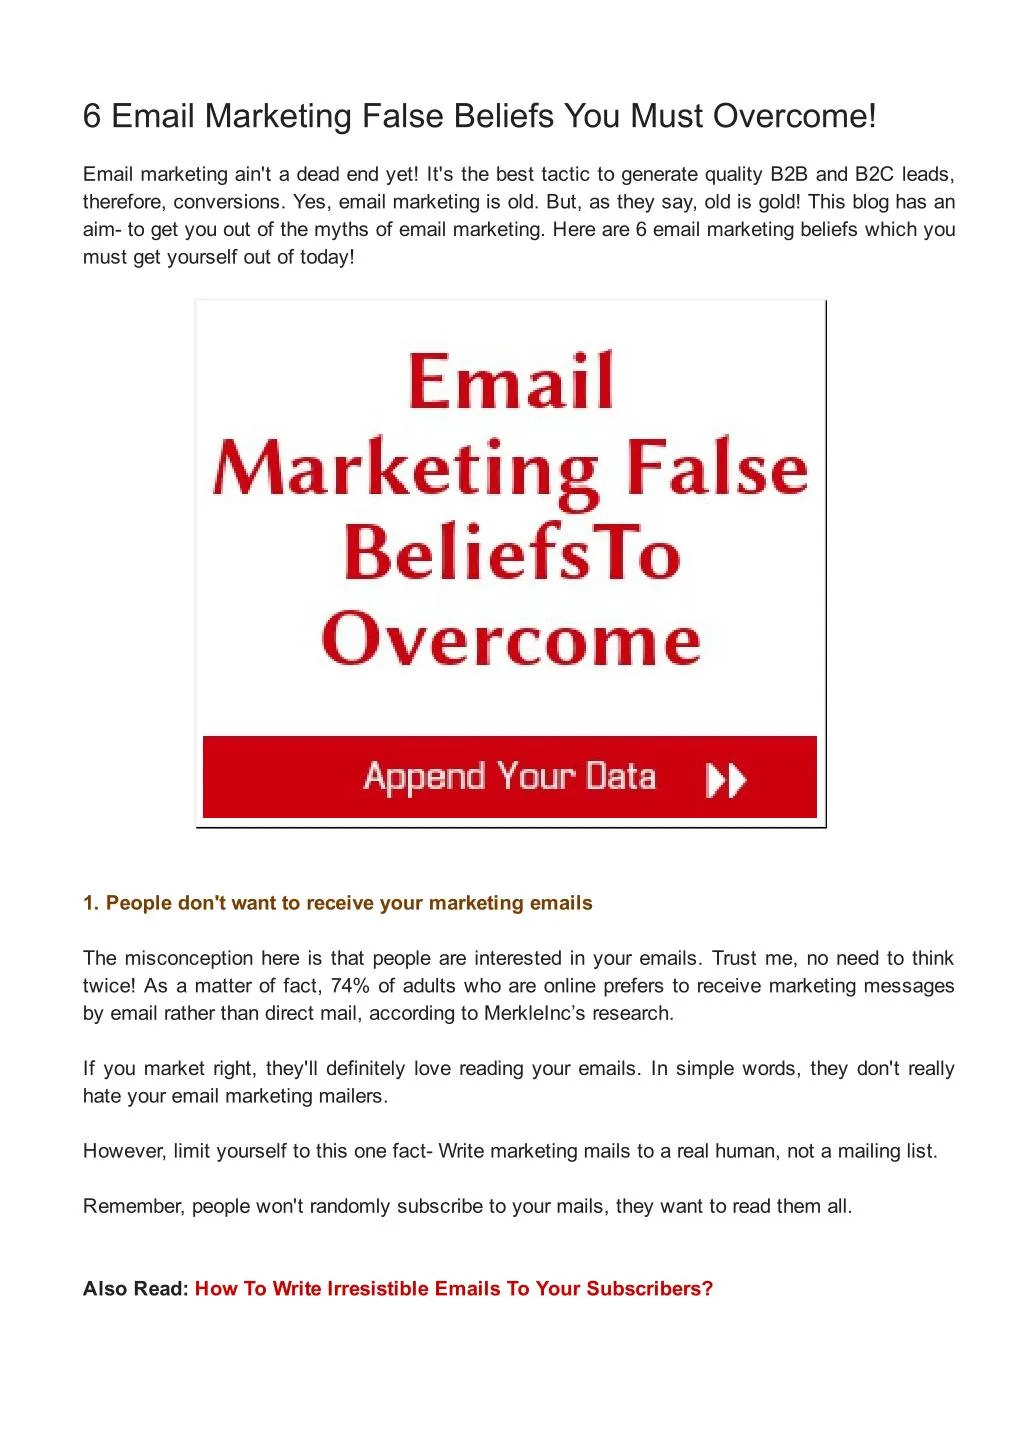 6 email marketing false beliefs you must overcome